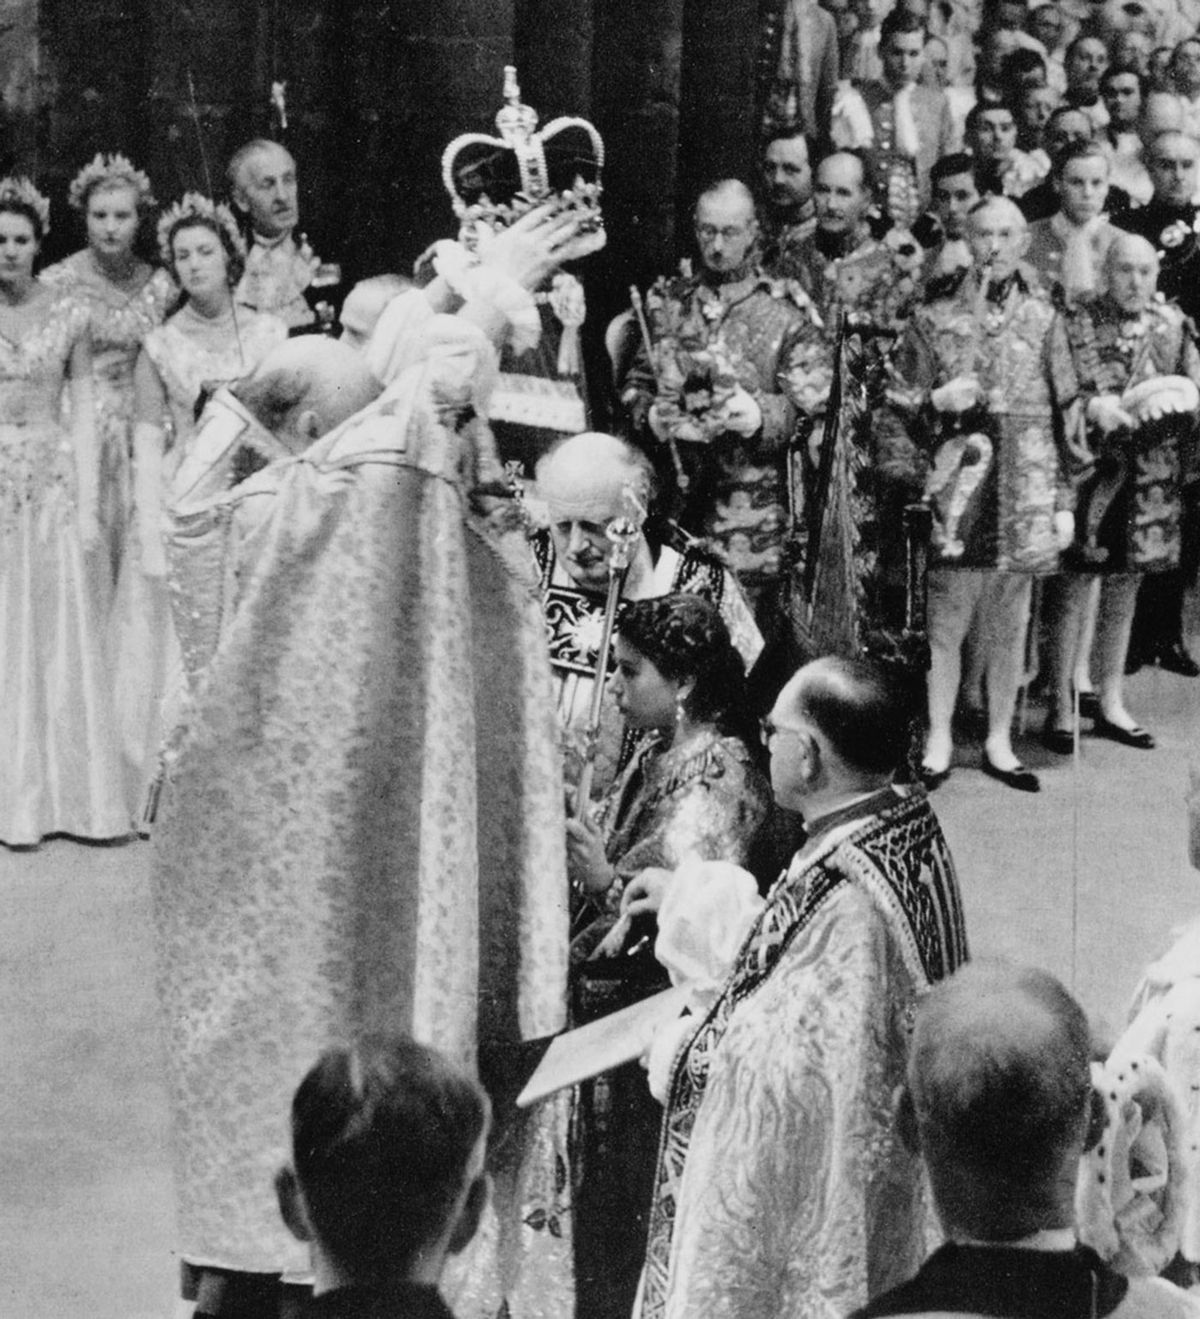 The moment of coronation: the Archbishop of Canterbury, Geoffrey Fisher, prepares to place St Edward's Crown on the head of Queen Elizabeth II, 1953 Royal Collection Trust / © His Majesty King Charles III 2023